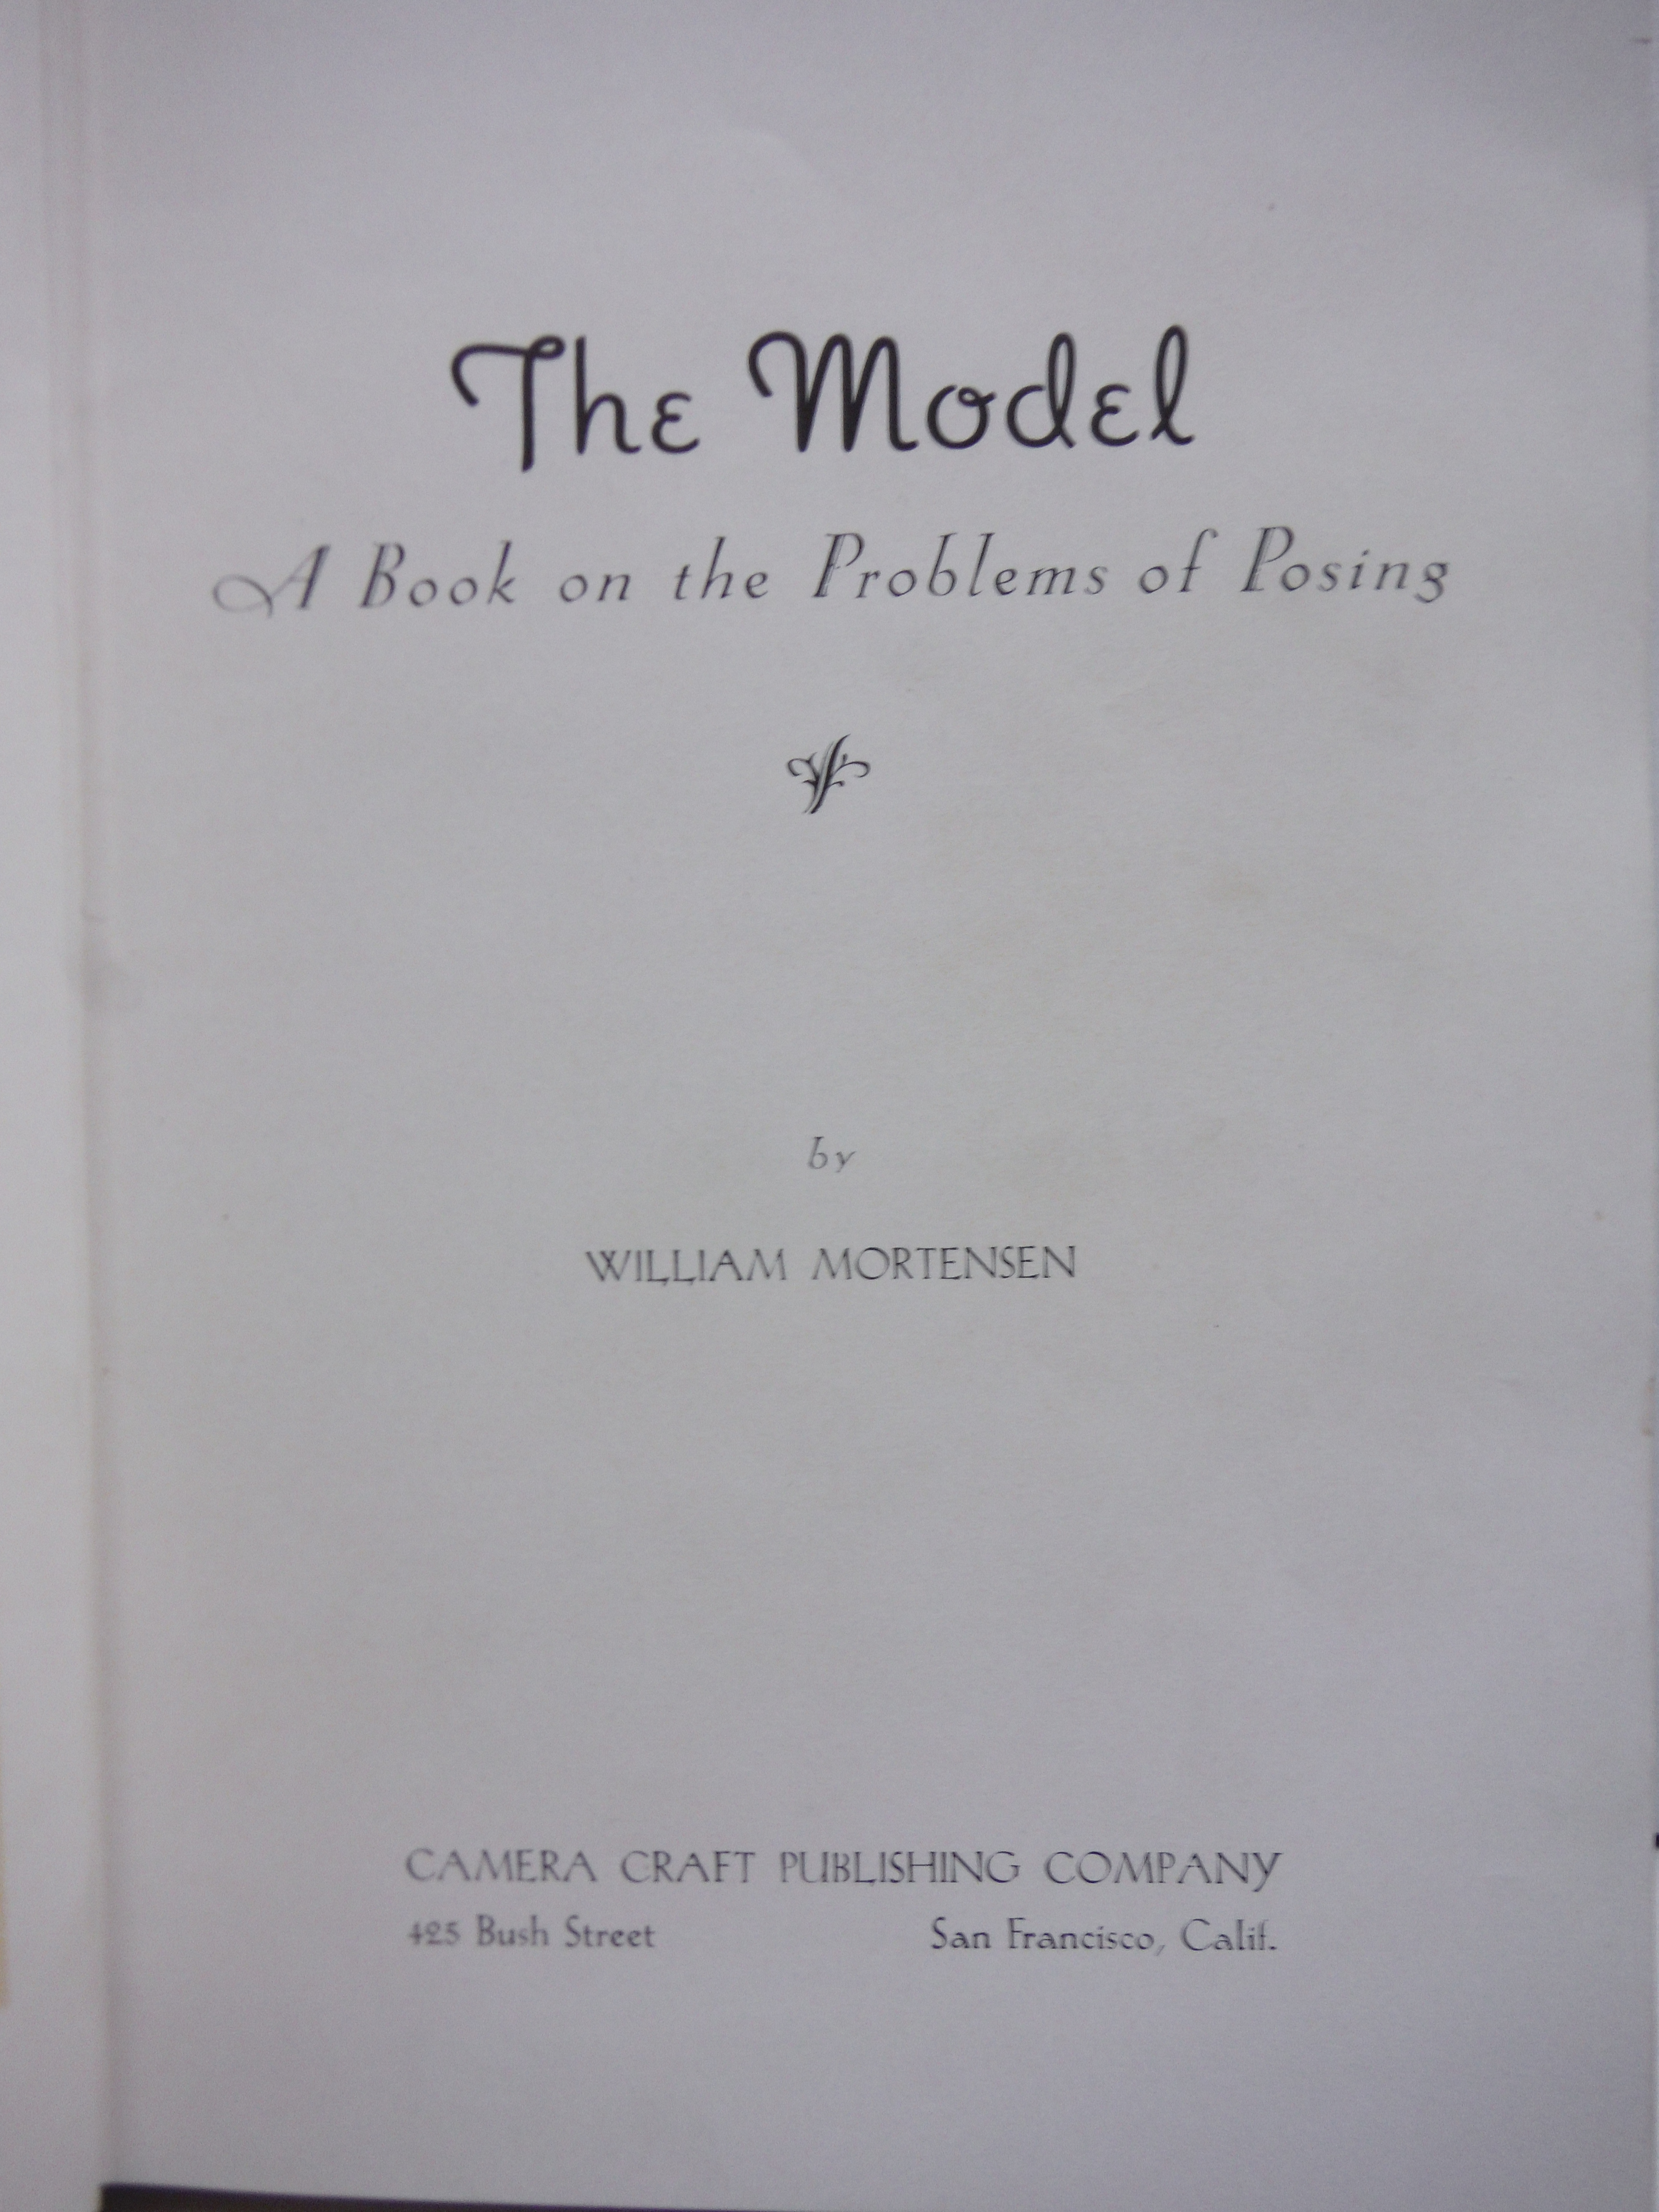 Image 1 of Model, The ( A Book of the Problems of Posing )